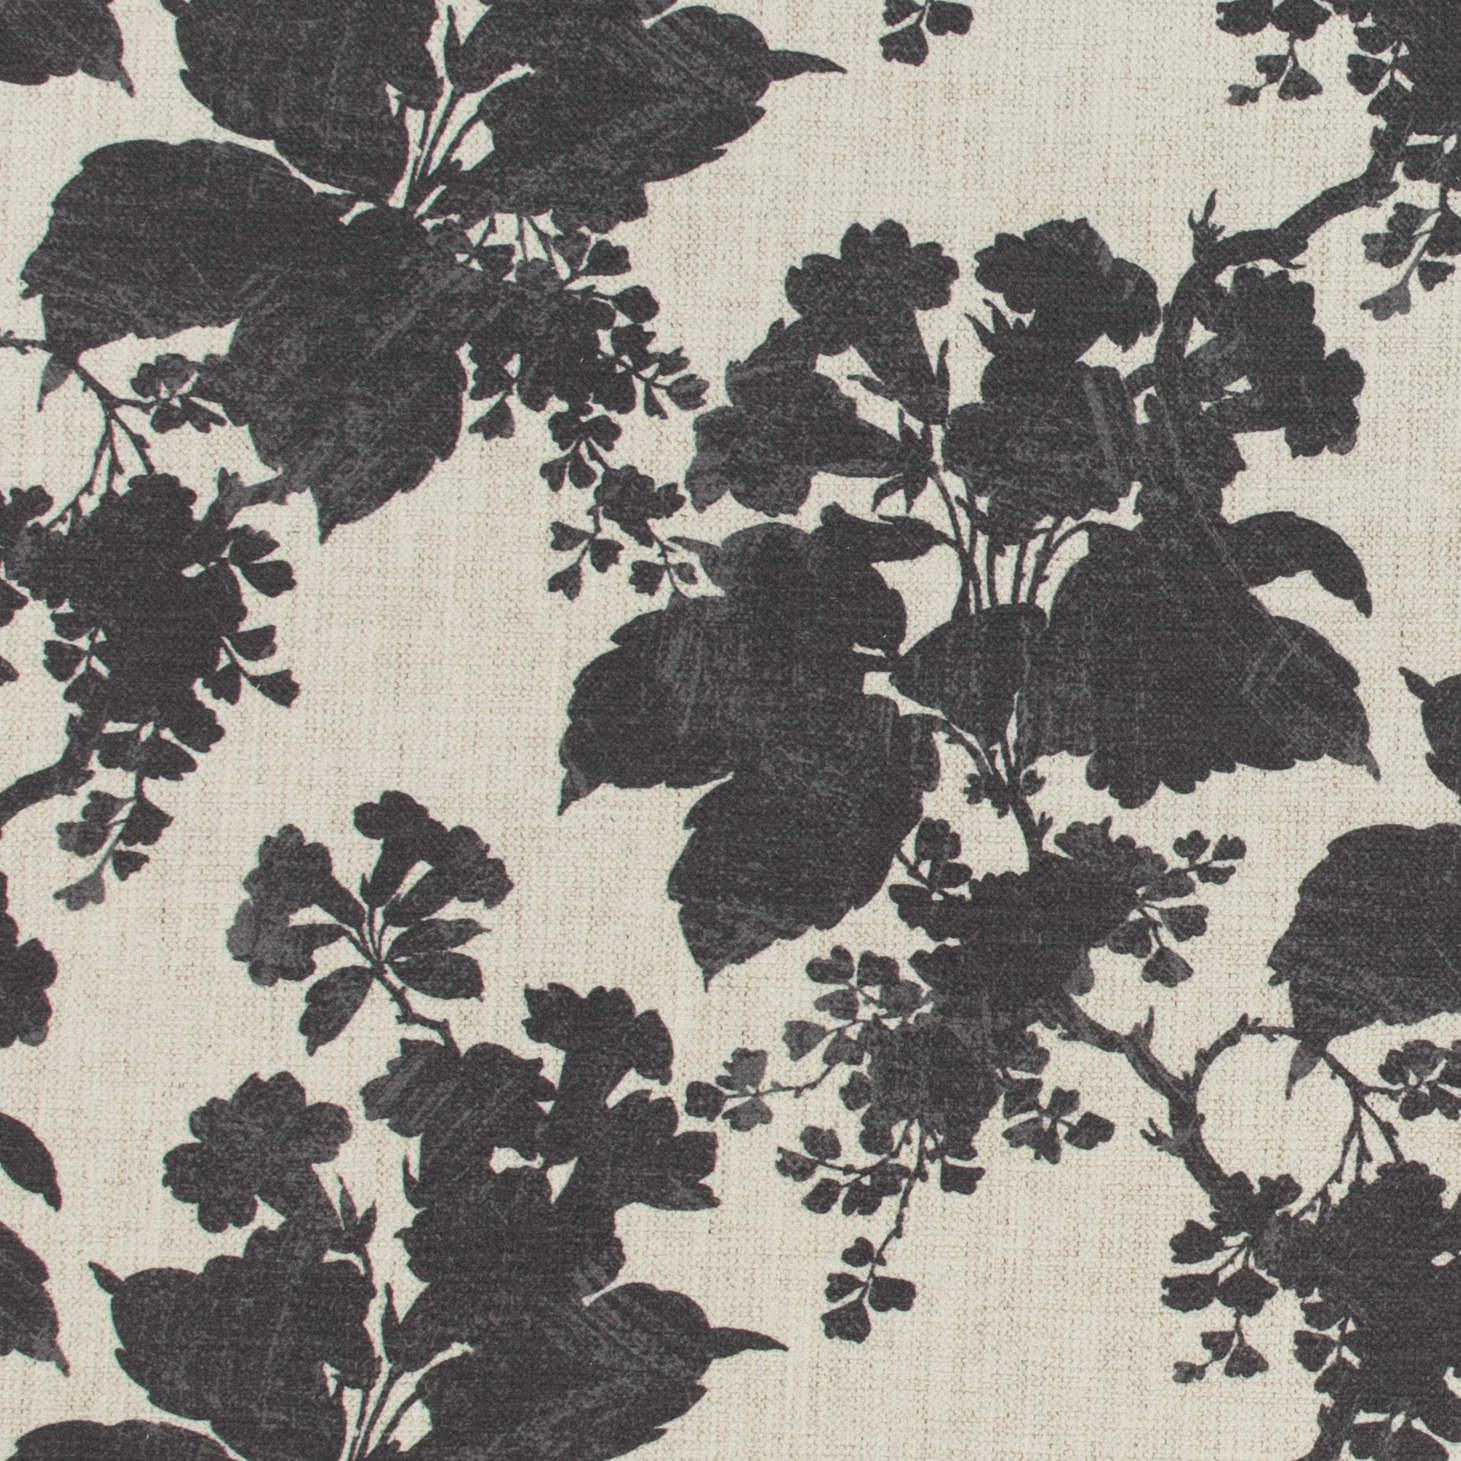 Ebony Black and White Floral Crypton Upholstery Fabric by the yard